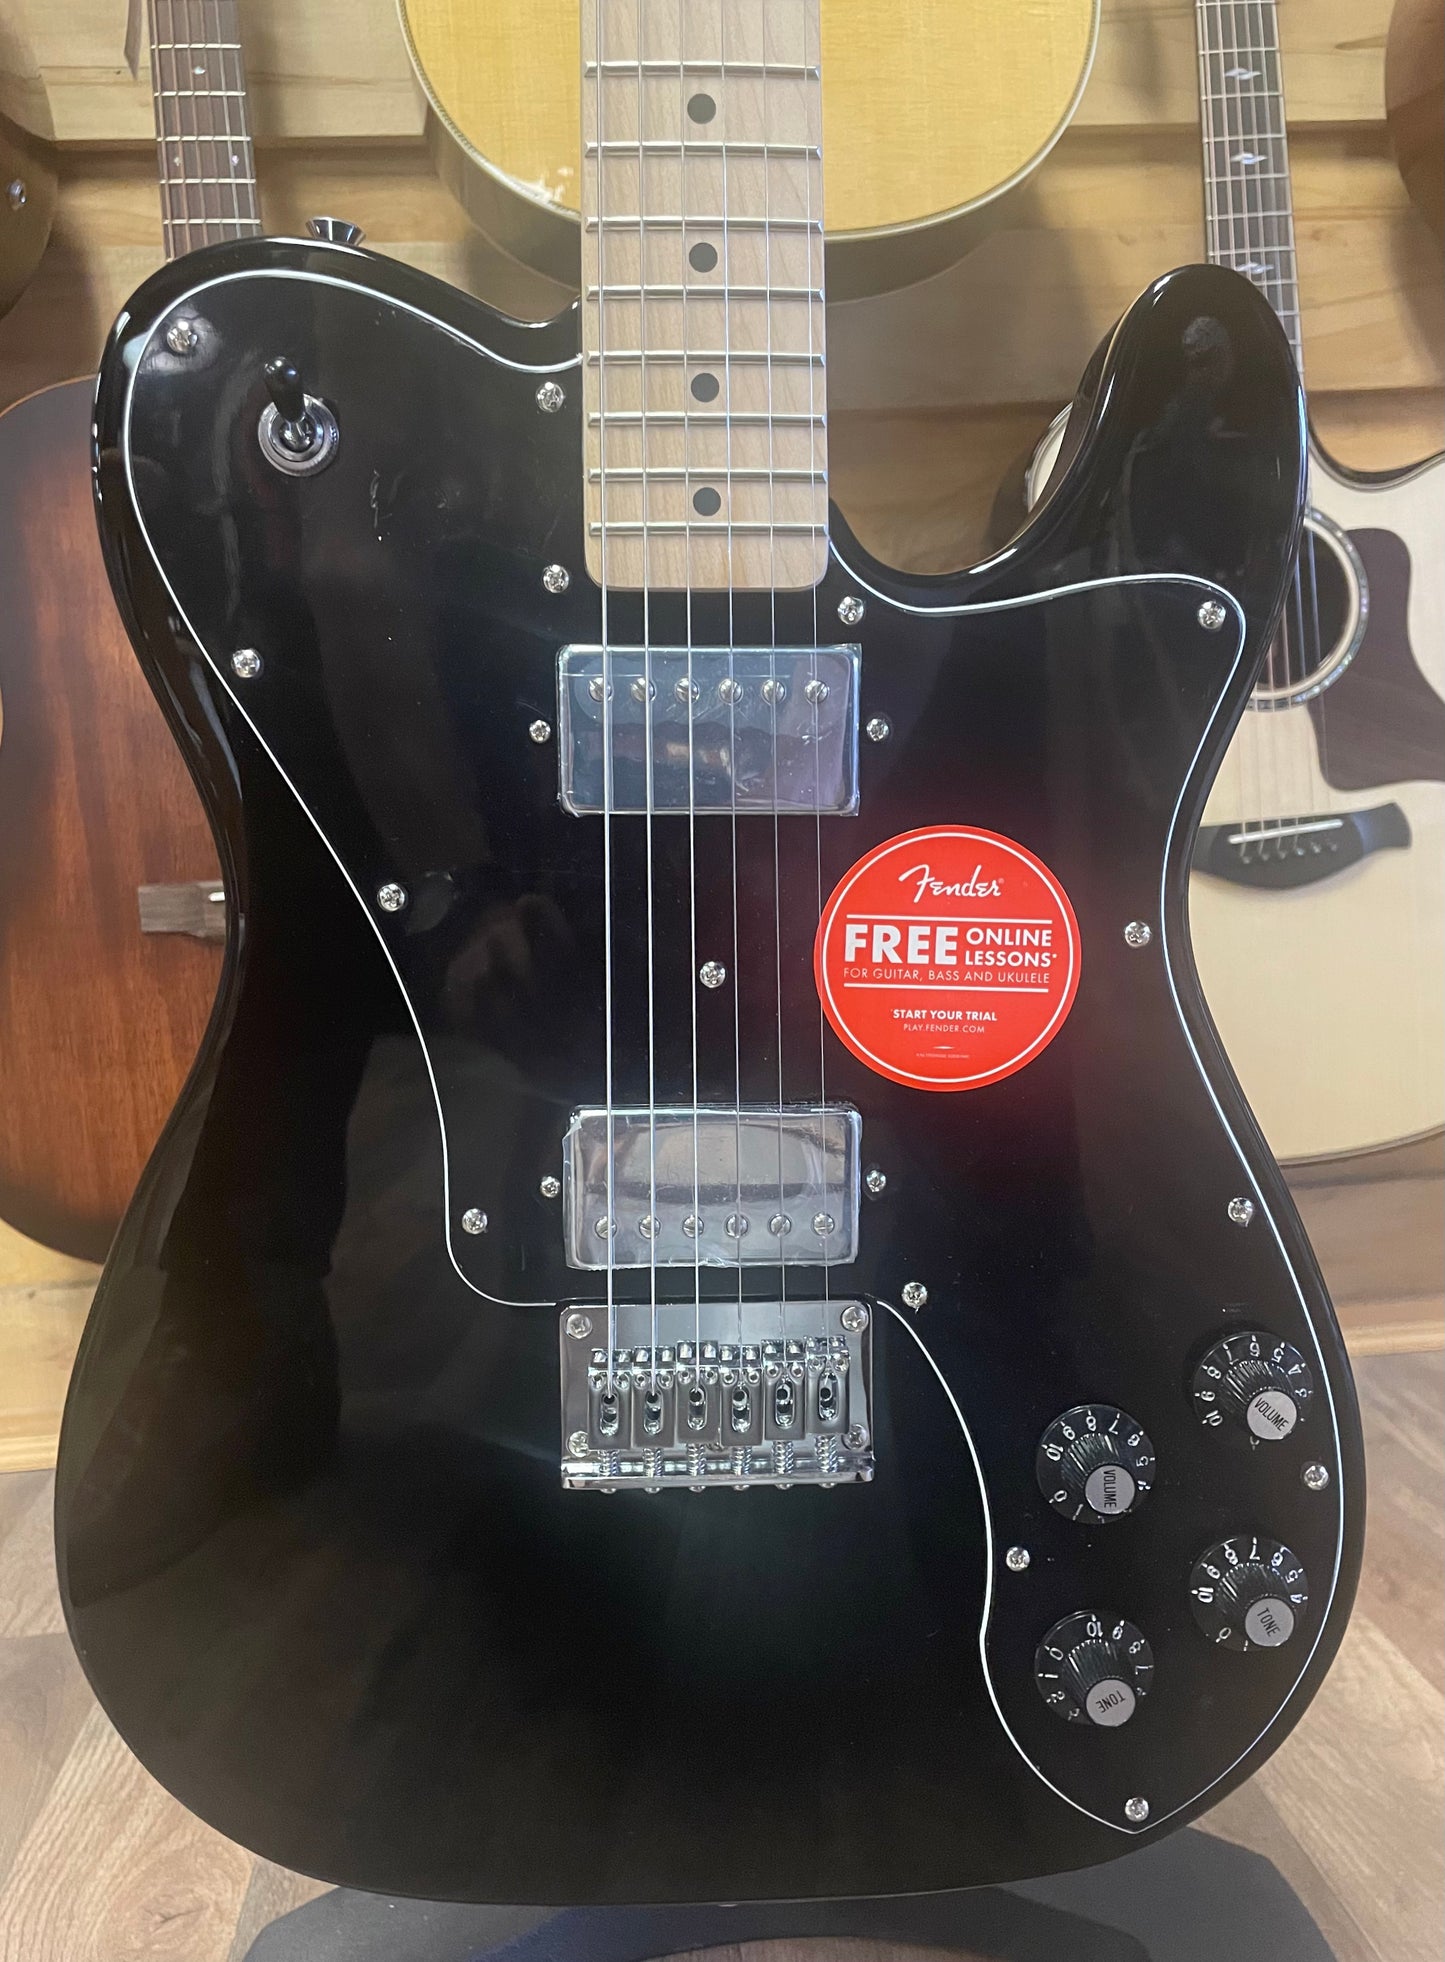 Squier Affinity Series Telecaster Deluxe Electric Guitar - Black with Maple Fingerboard (NEW)